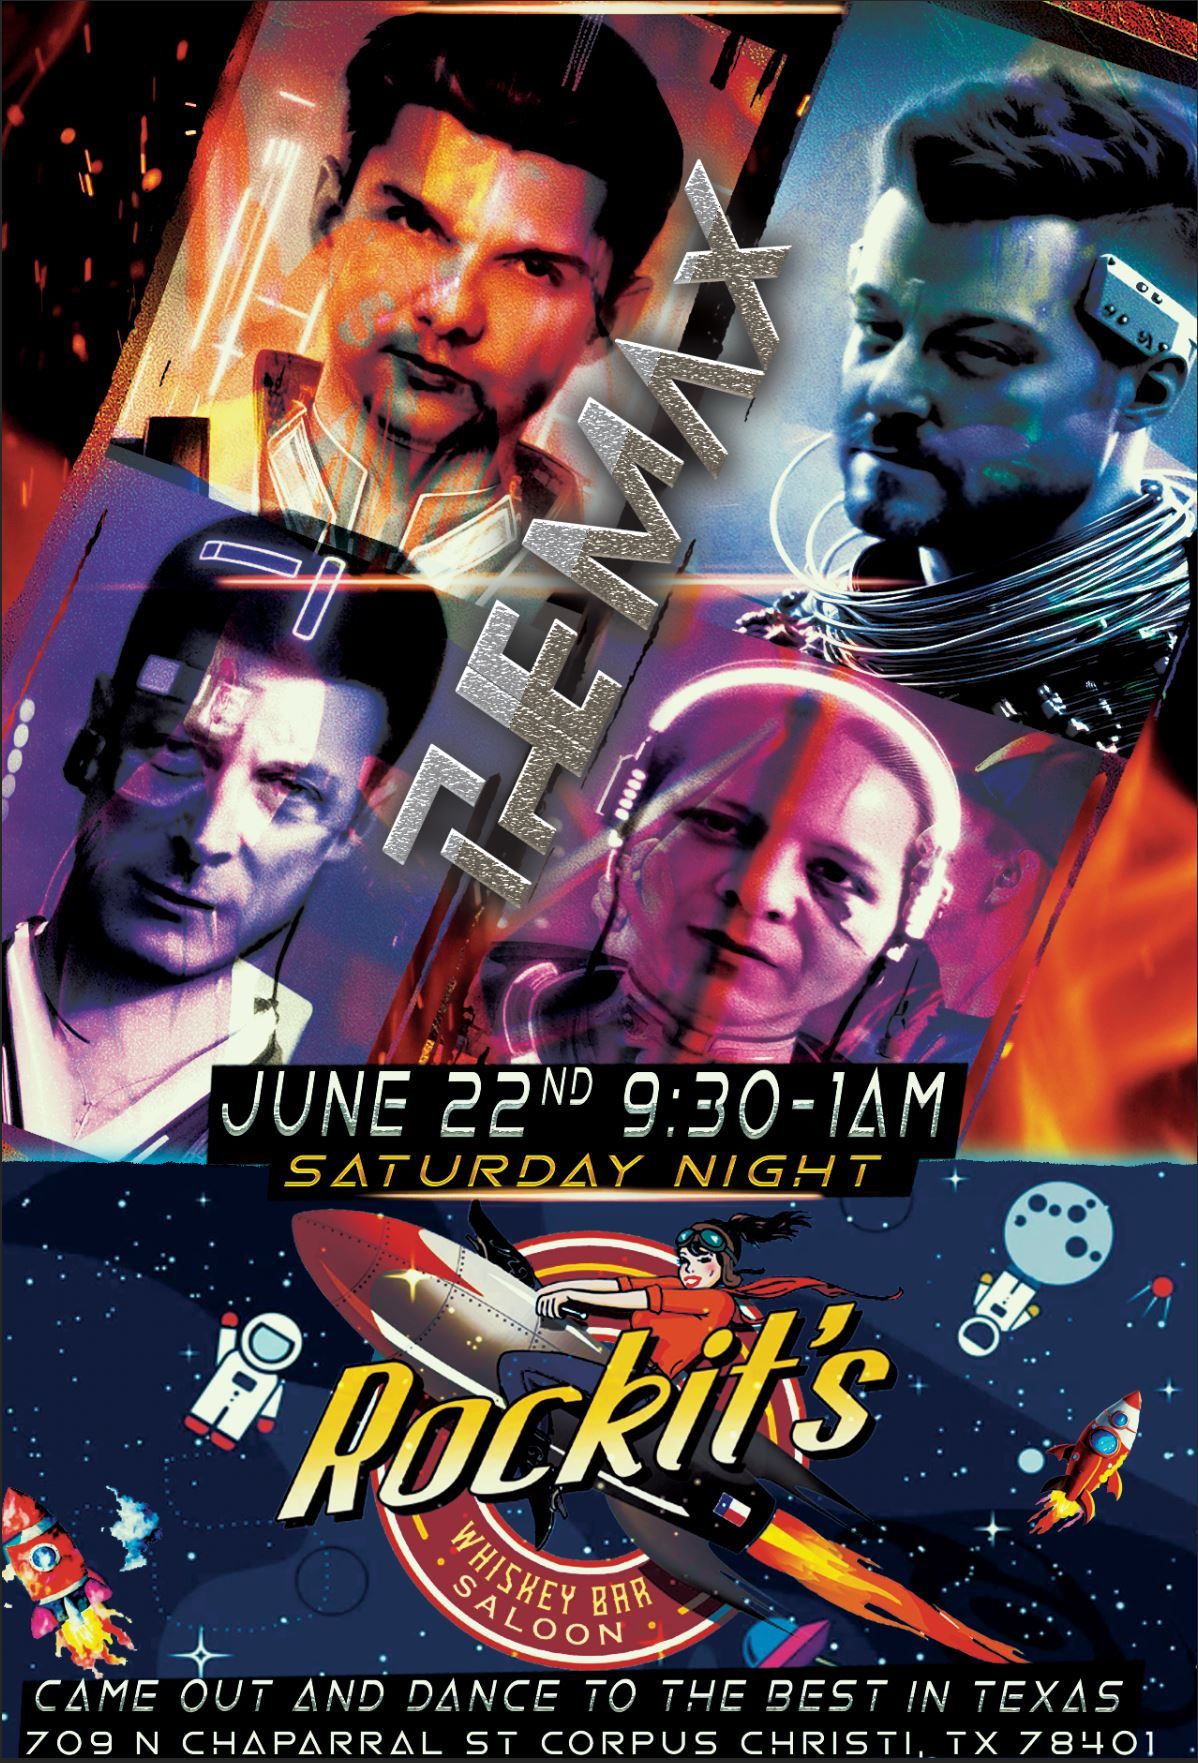 Time again to Rock the Rockit!! Sat June 22nd!! 9:30 kick off!